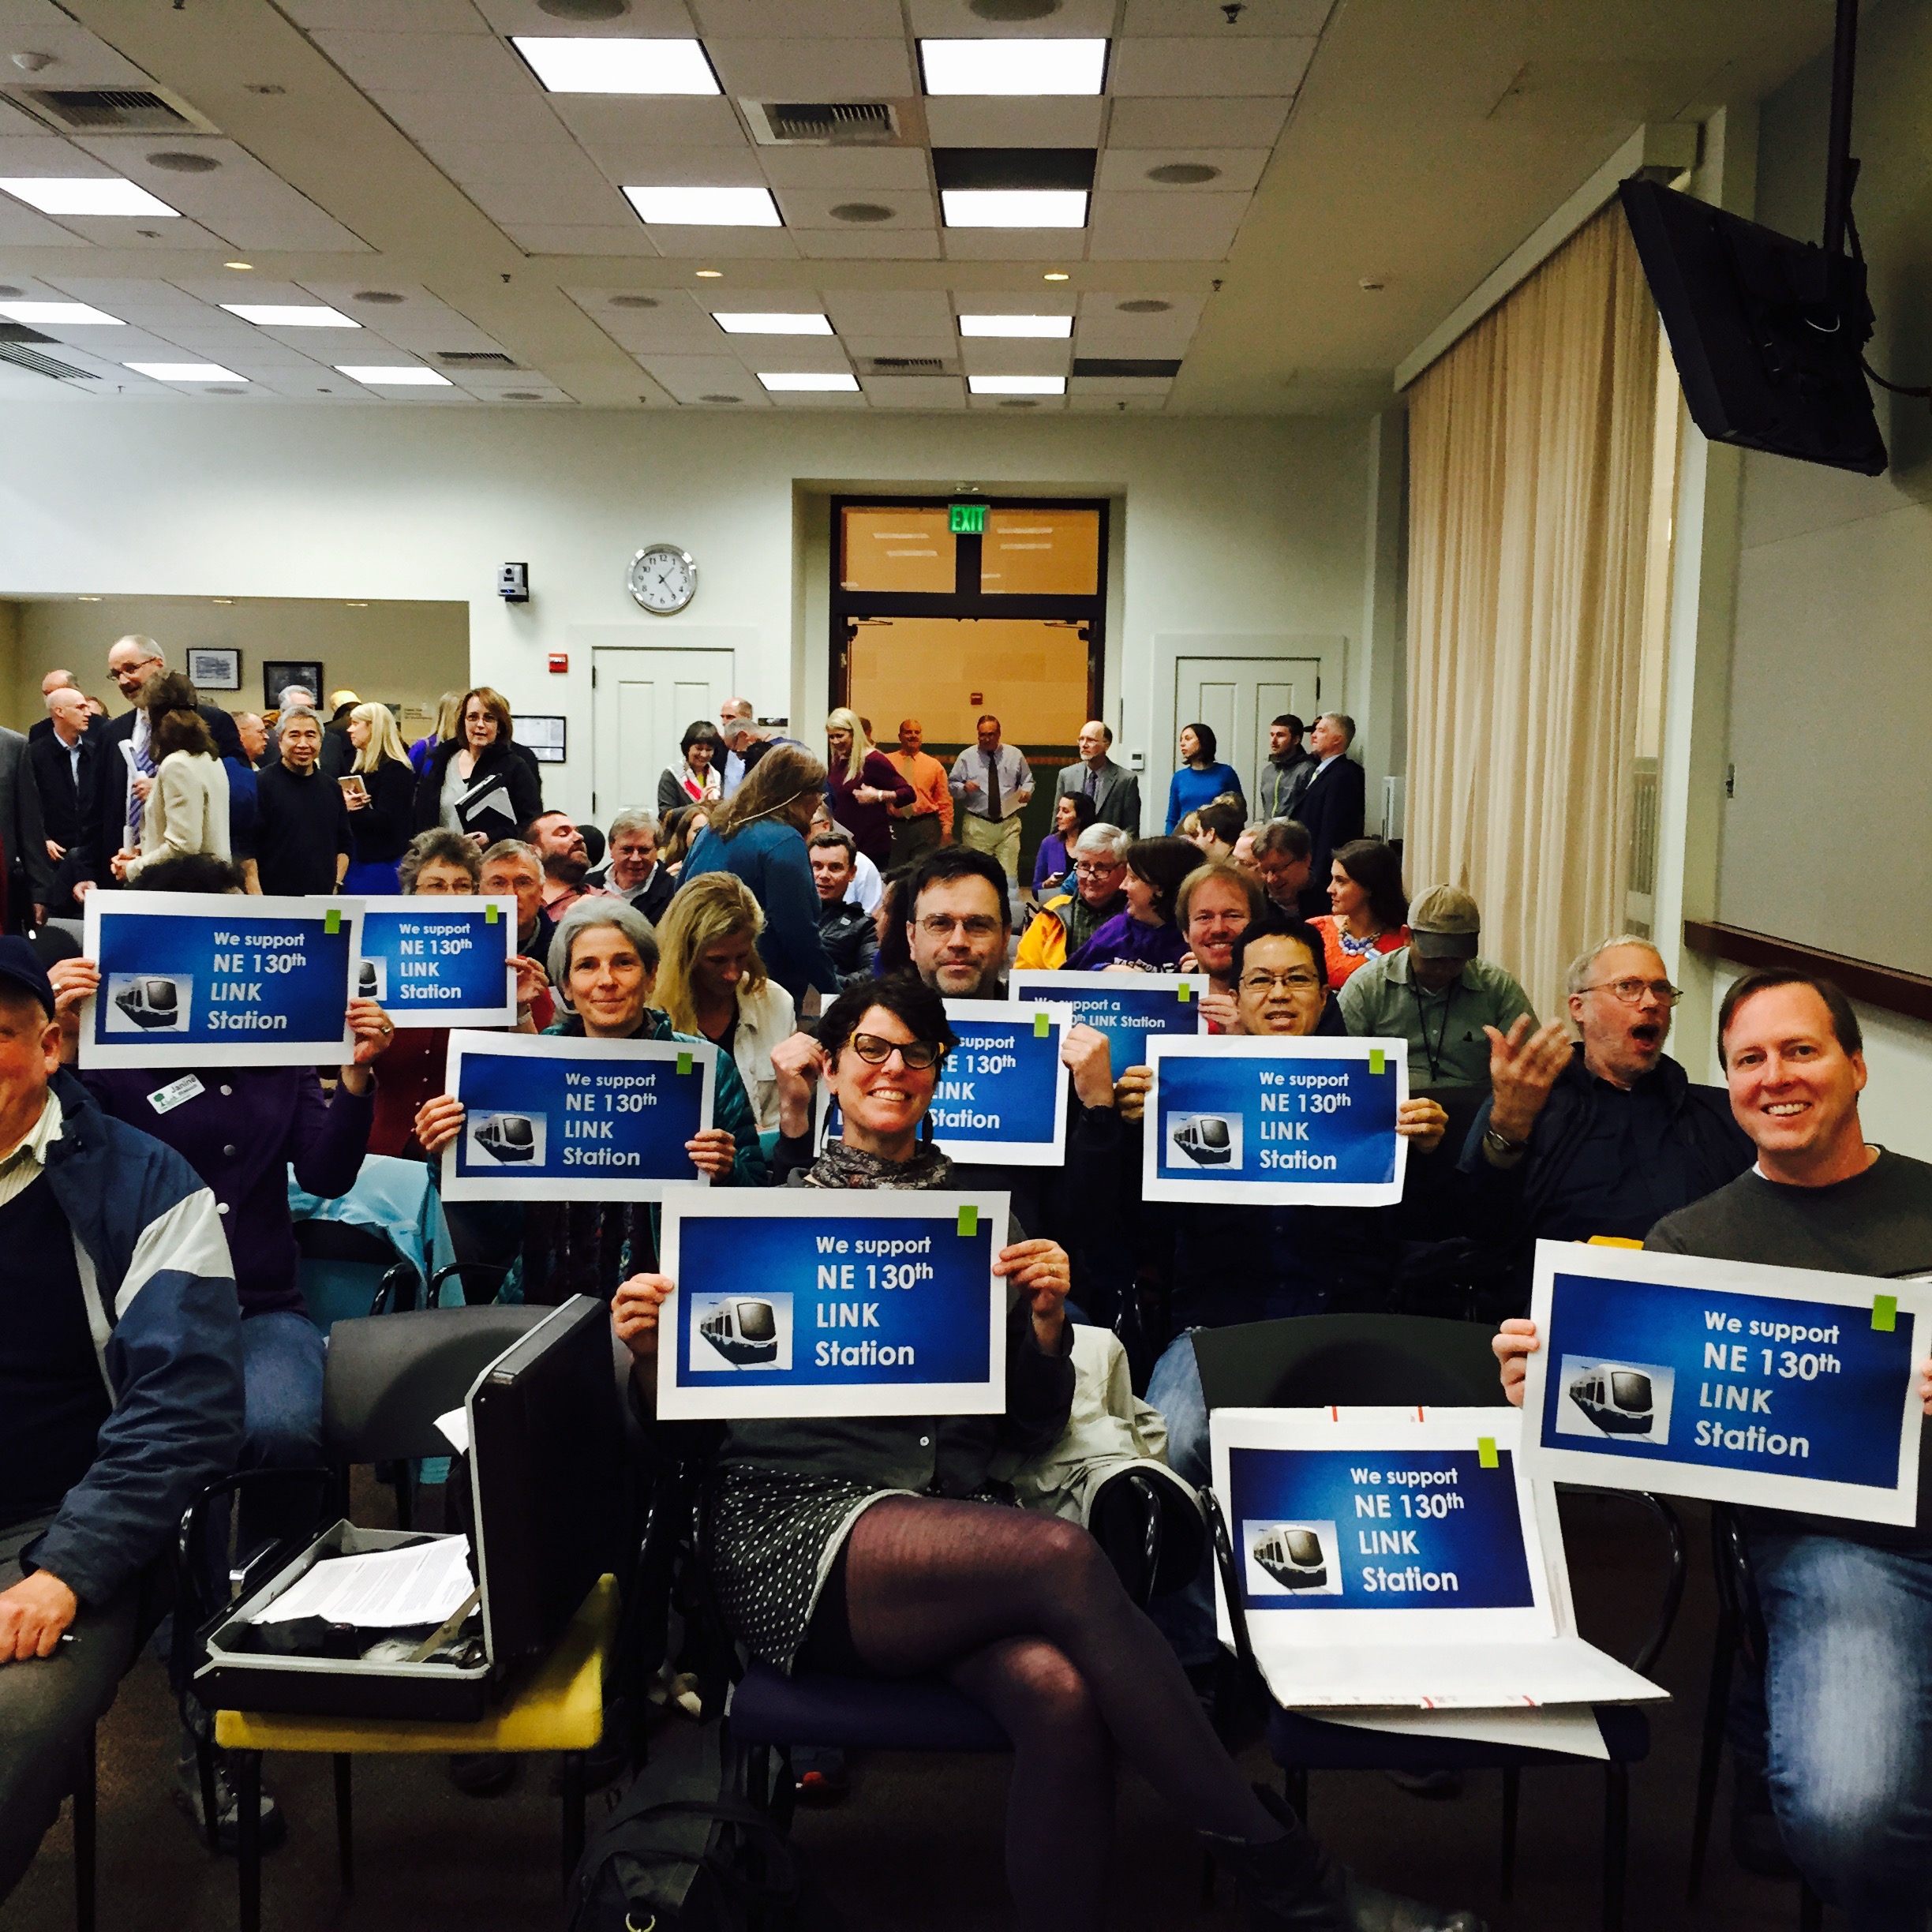 NE 130th Link Staton supporters at Sound Transit, courtesy of Renee Staton.